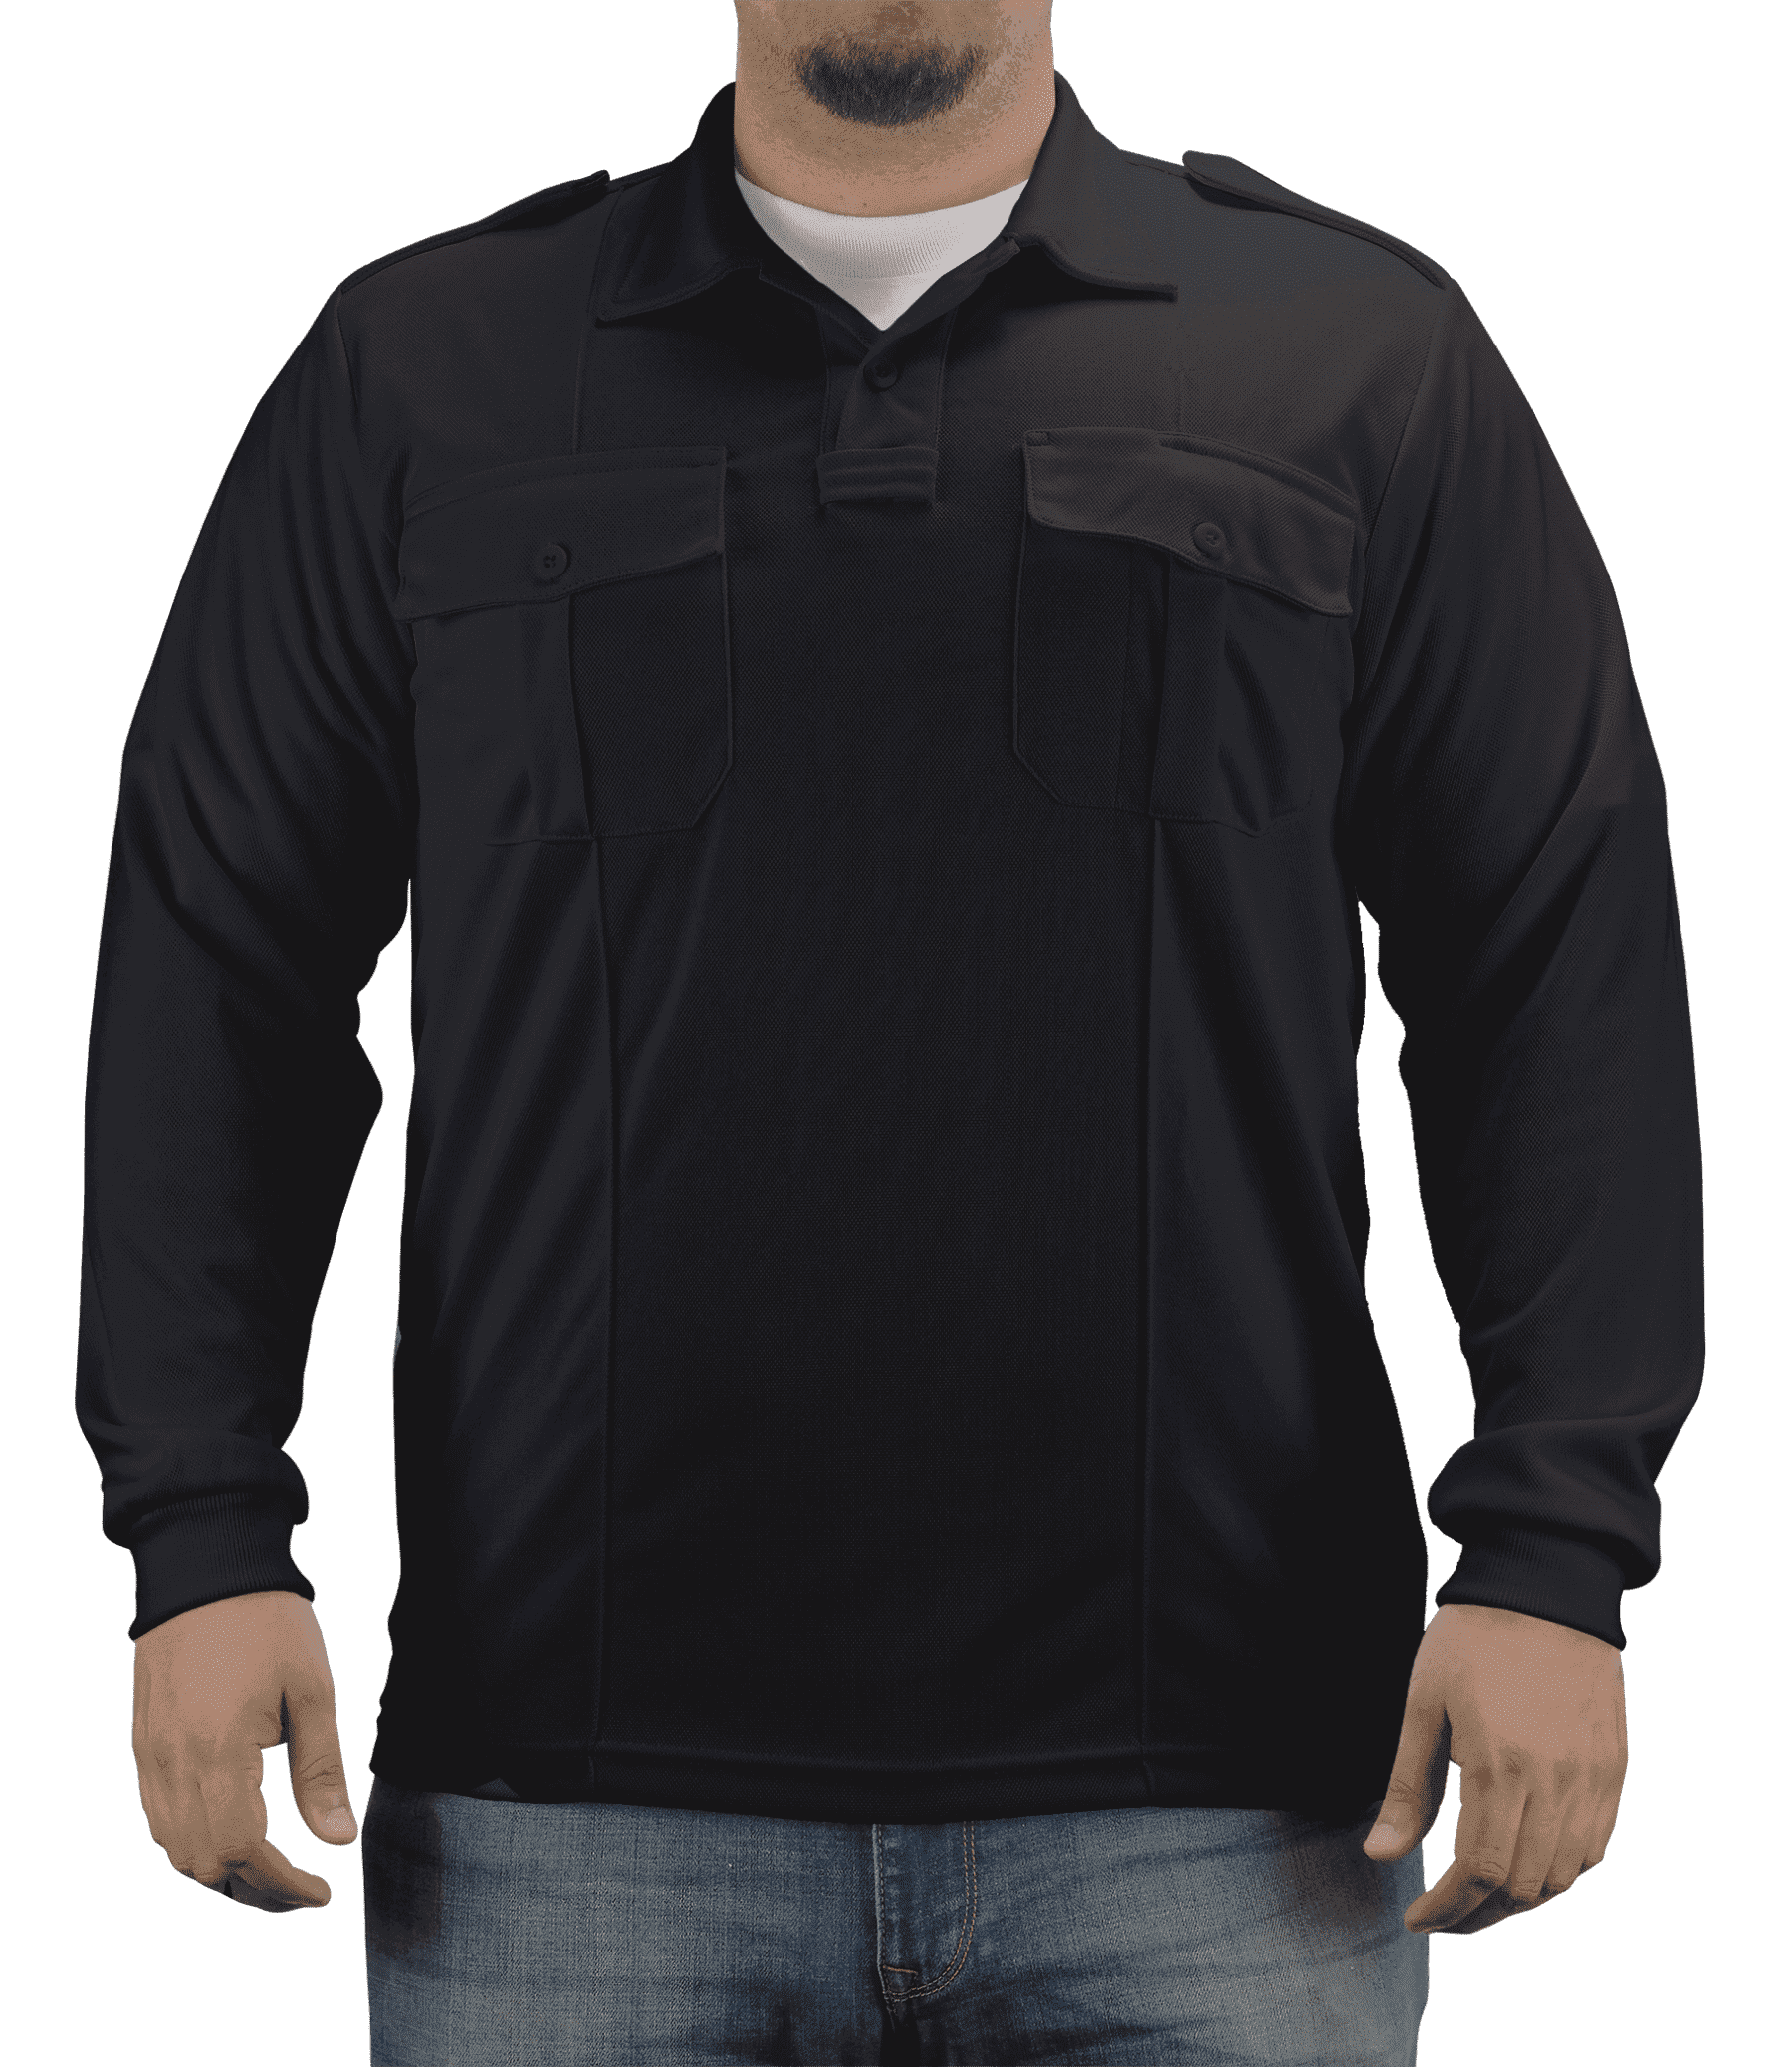 Pro-Dry Long Sleeve Polo Shirt with Two Pockets - Discontinued